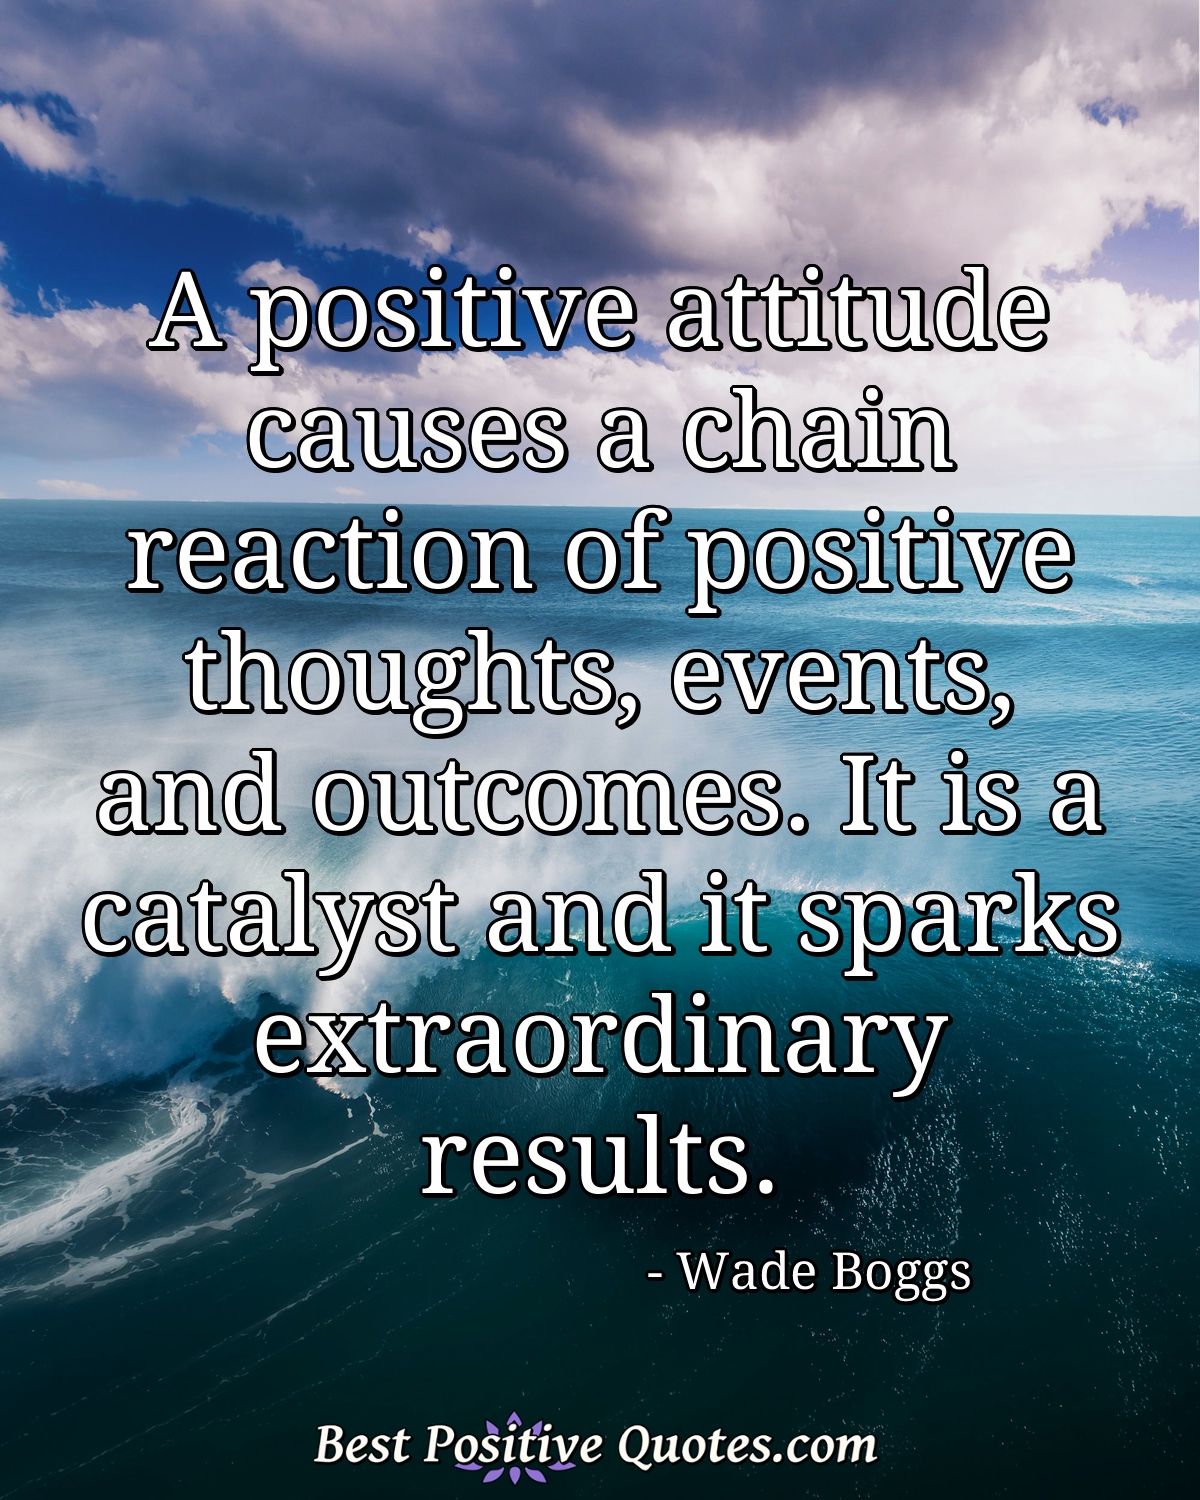 A positive attitude causes a chain reaction of positive thoughts, events, and outcomes. It is a catalyst and it sparks extraordinary results. - Wade Boggs